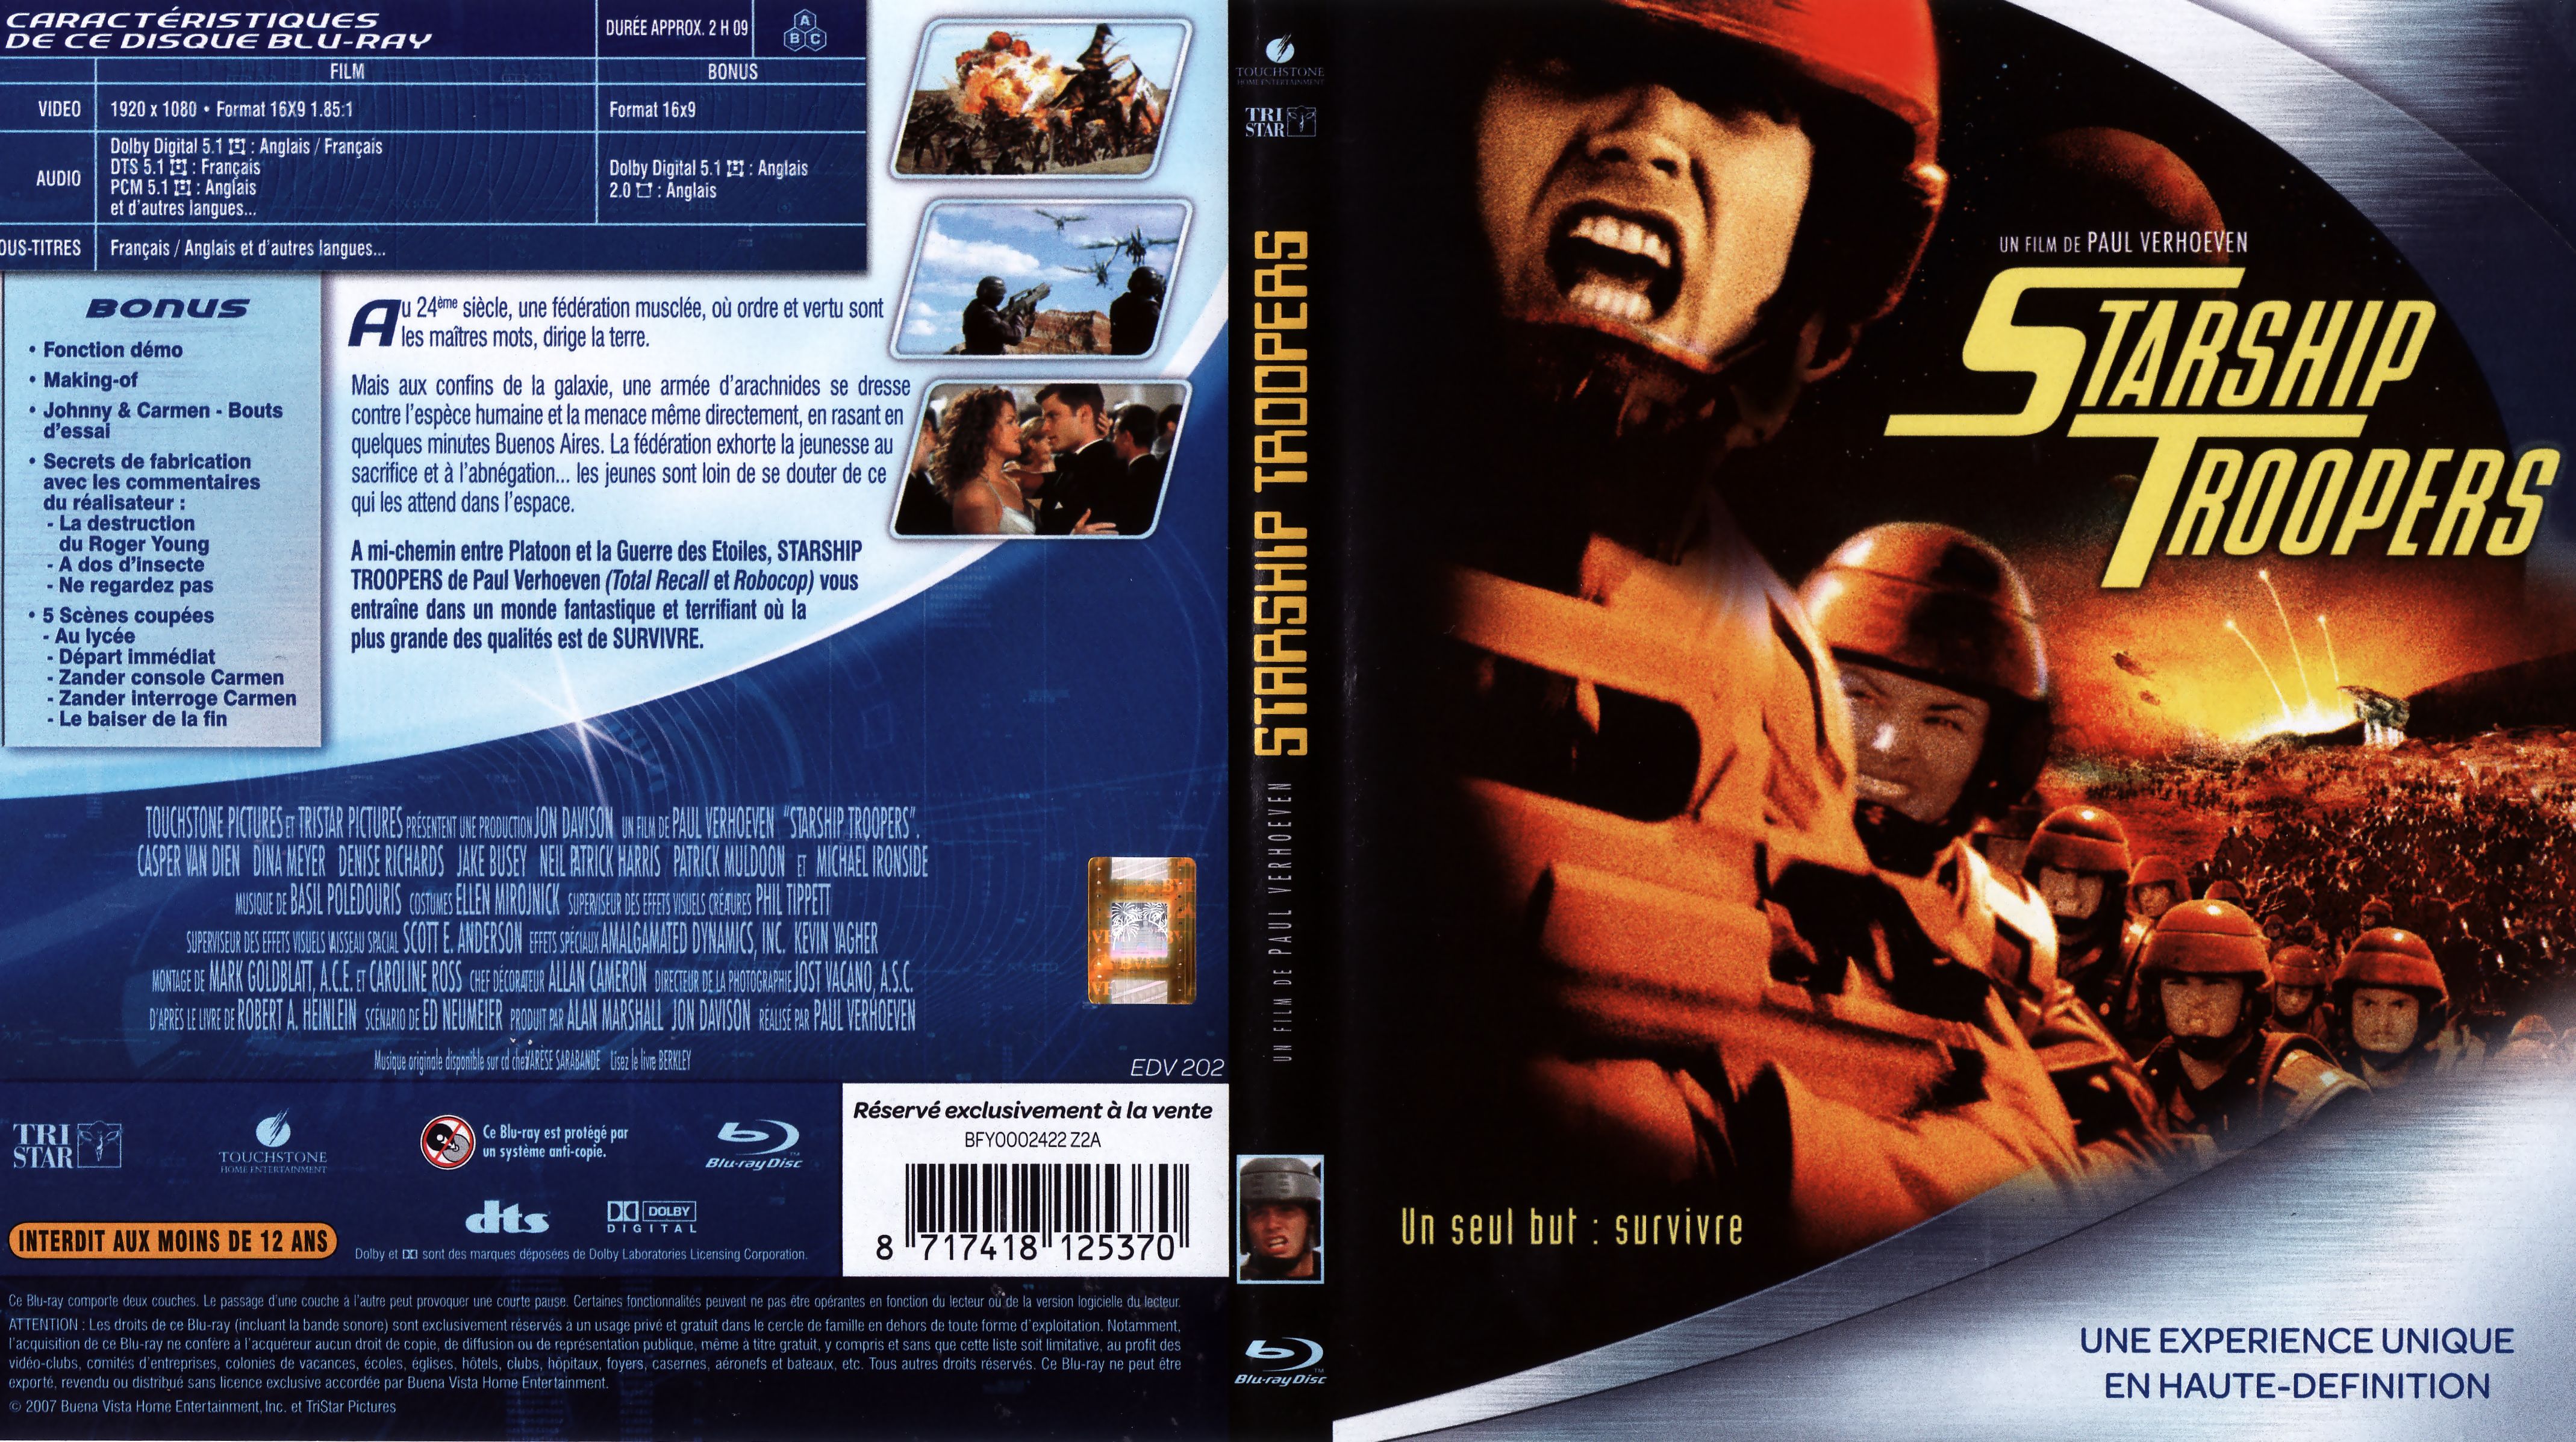 Jaquette DVD Starship troopers (BLU-RAY)